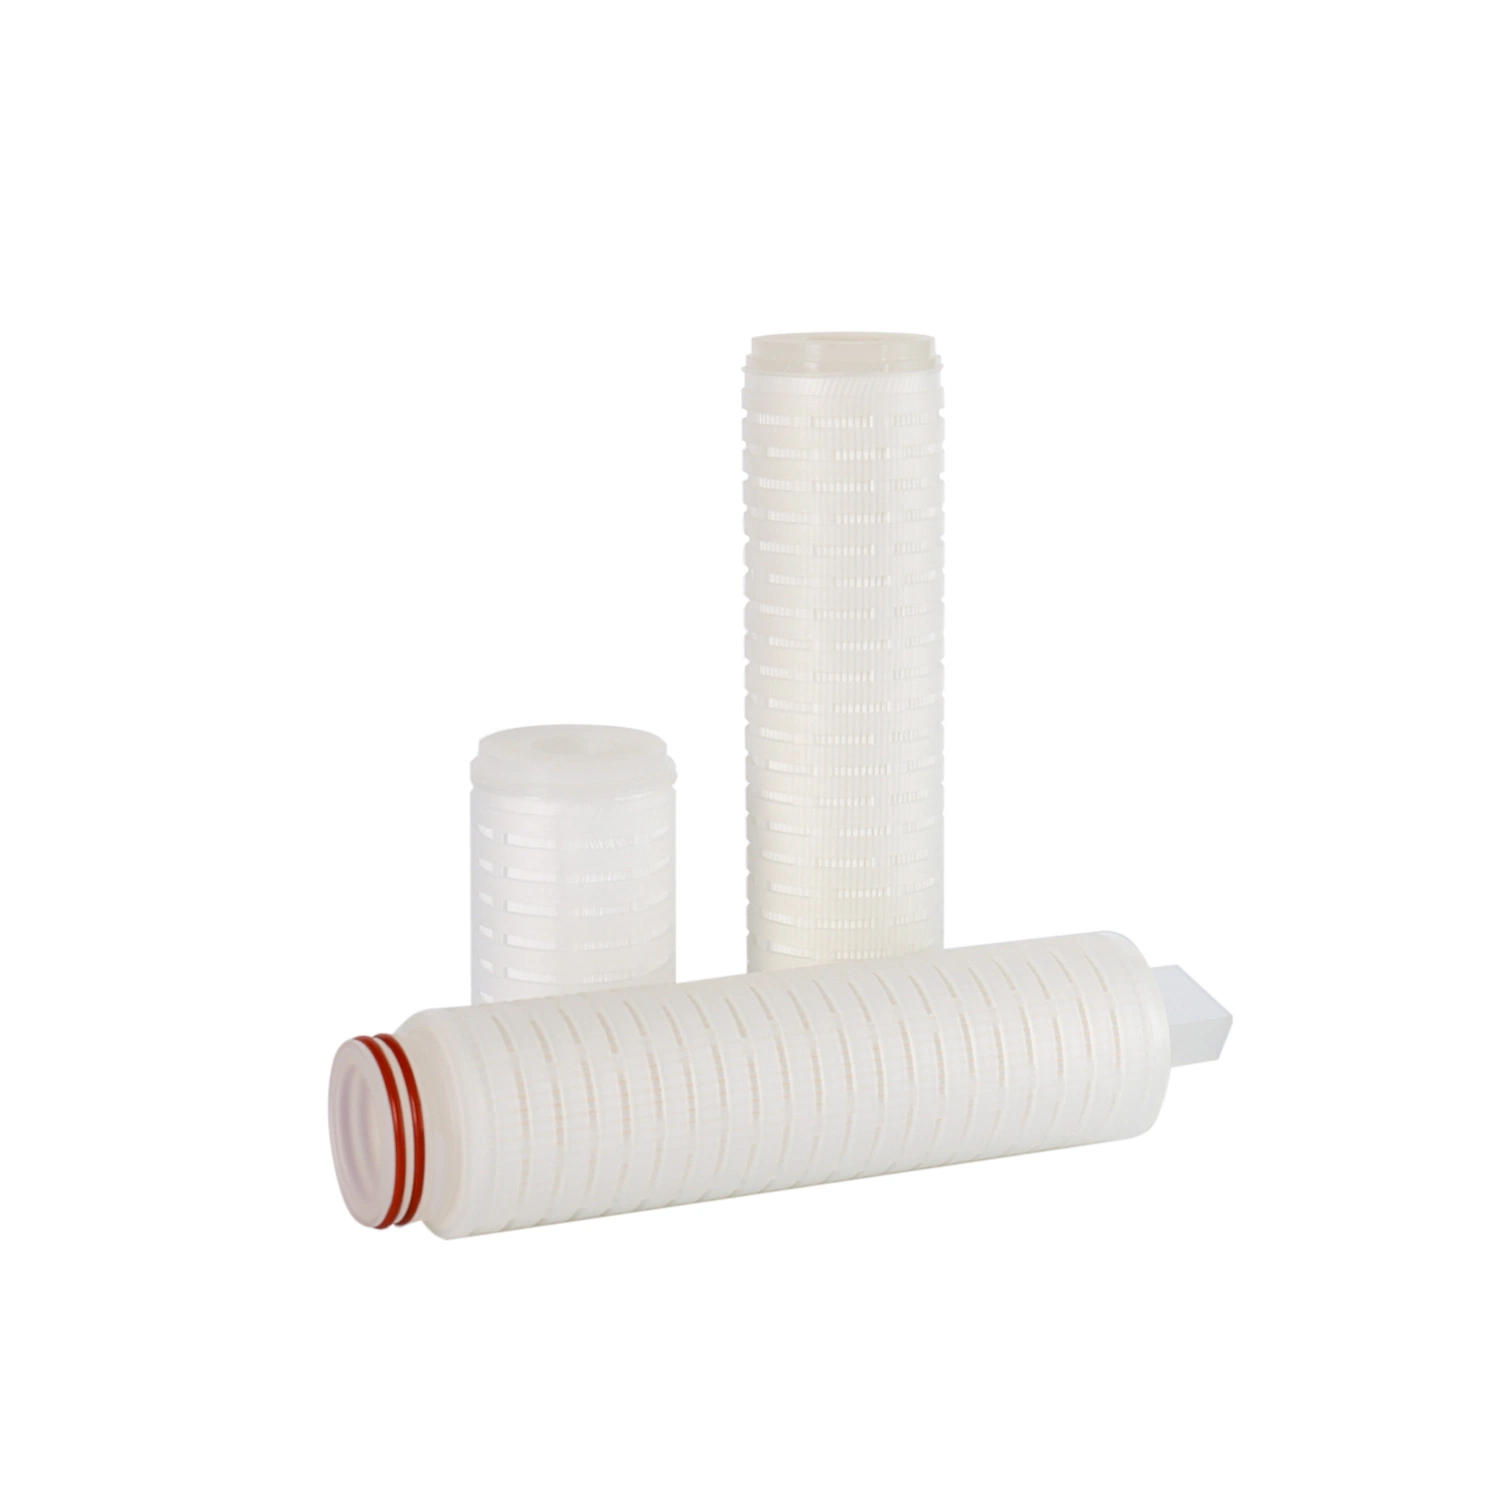 PTFE Hydrophilic Pleated Filter Cartridge for Chemical Solvents, Fine Chemicals, Inks, etc